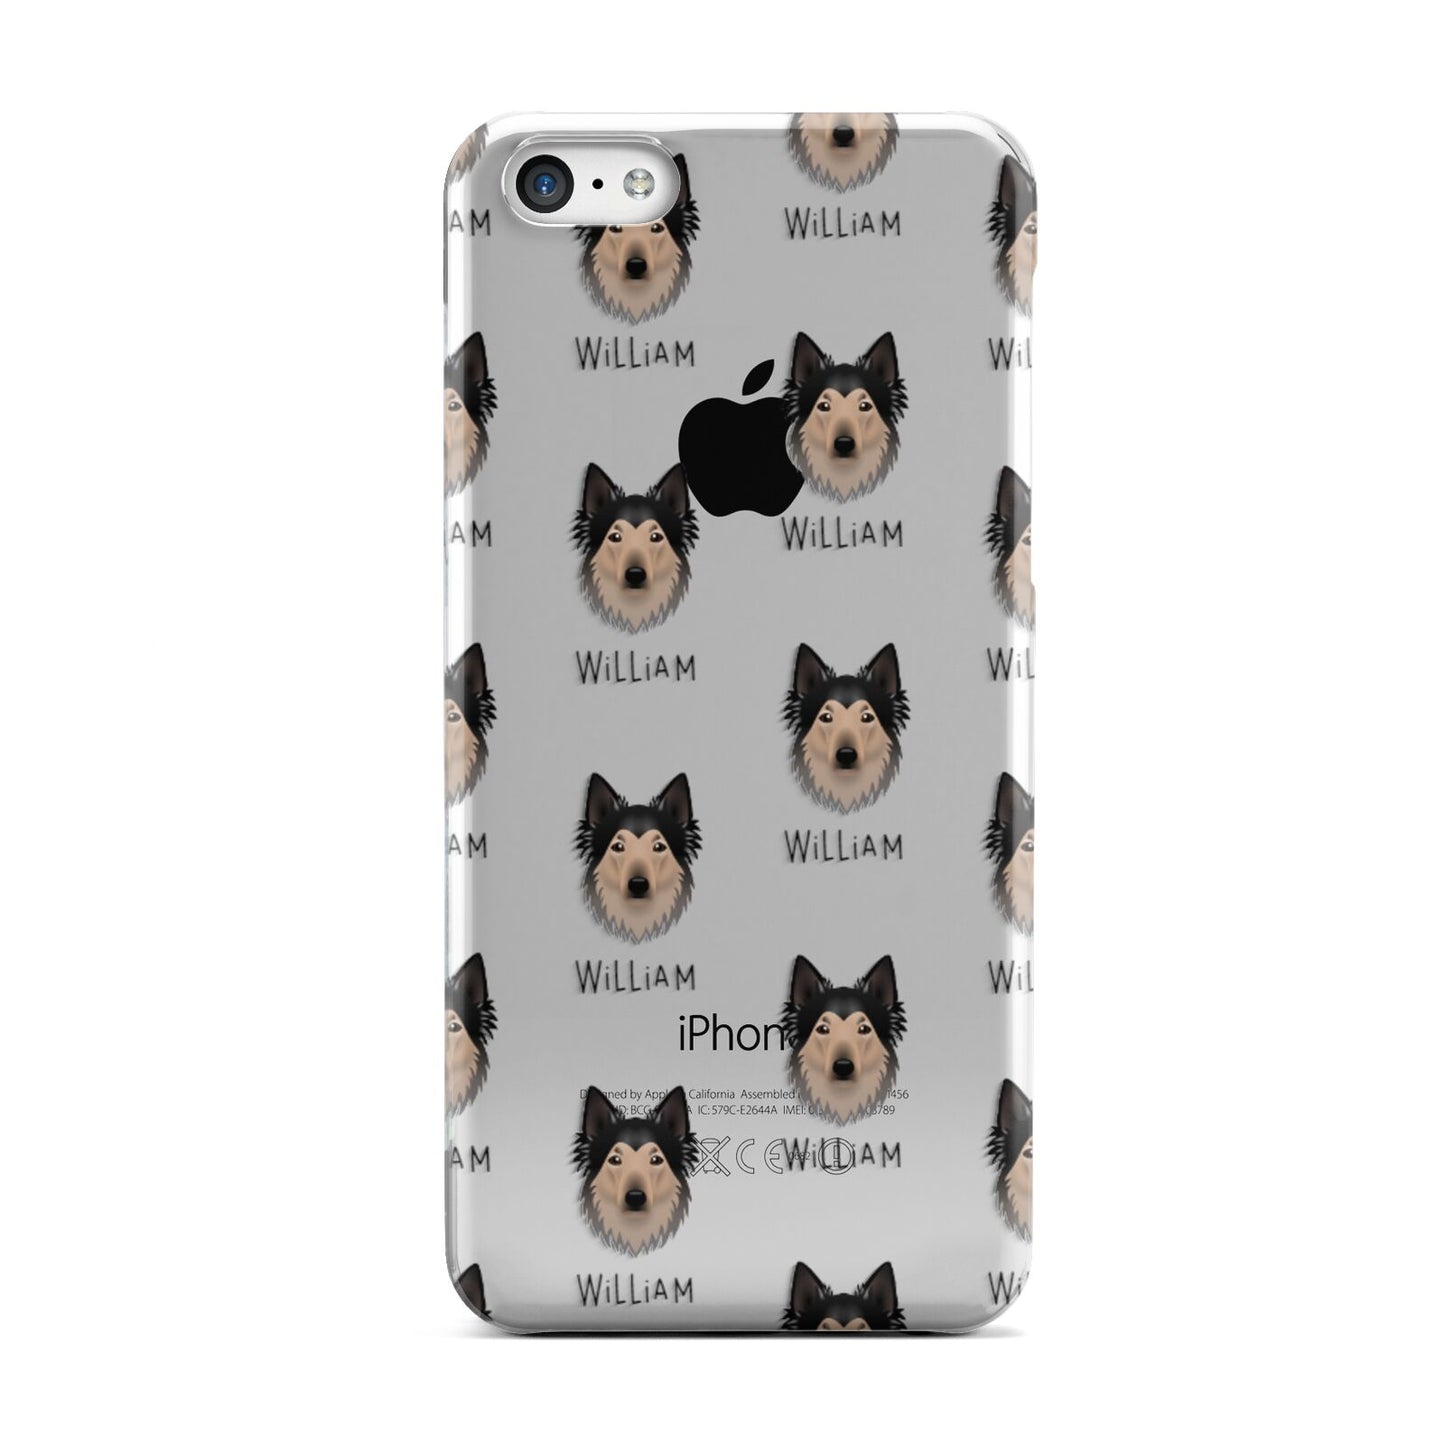 Shollie Icon with Name Apple iPhone 5c Case